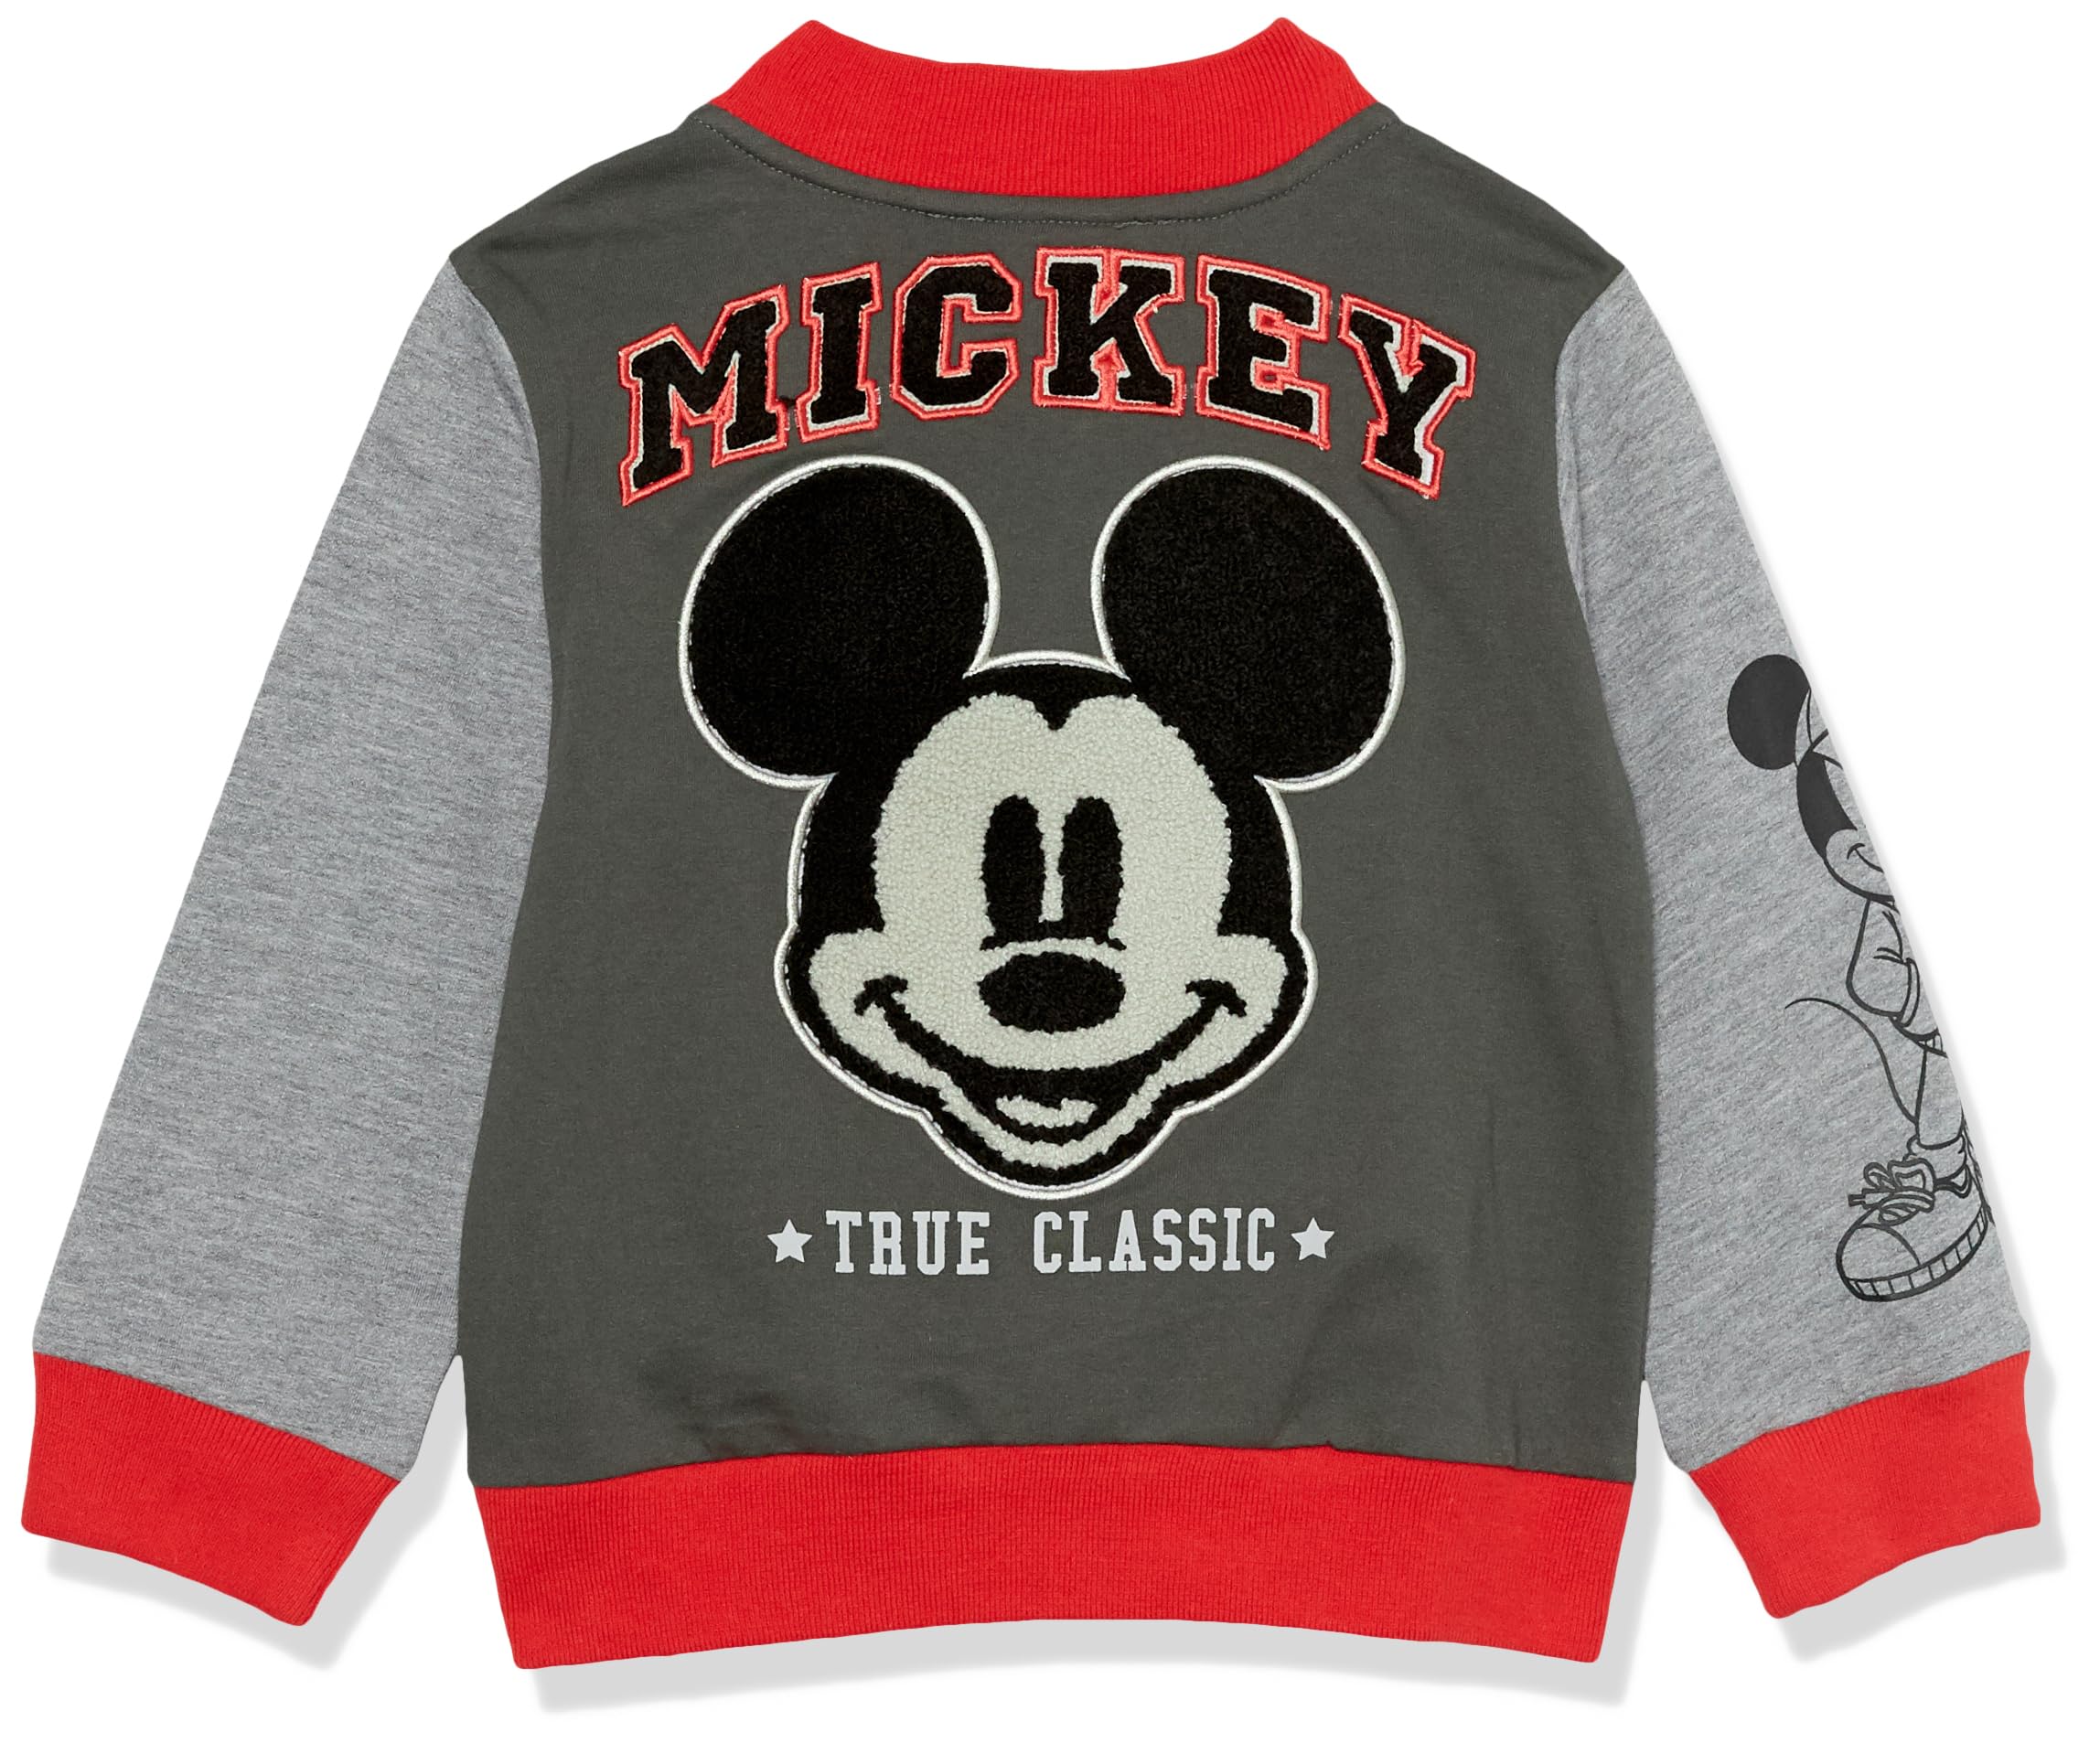 Disney Boys' Mickey Mouse French Terry Button Up Varsity Bomber Jacket Toddler to Big Kid